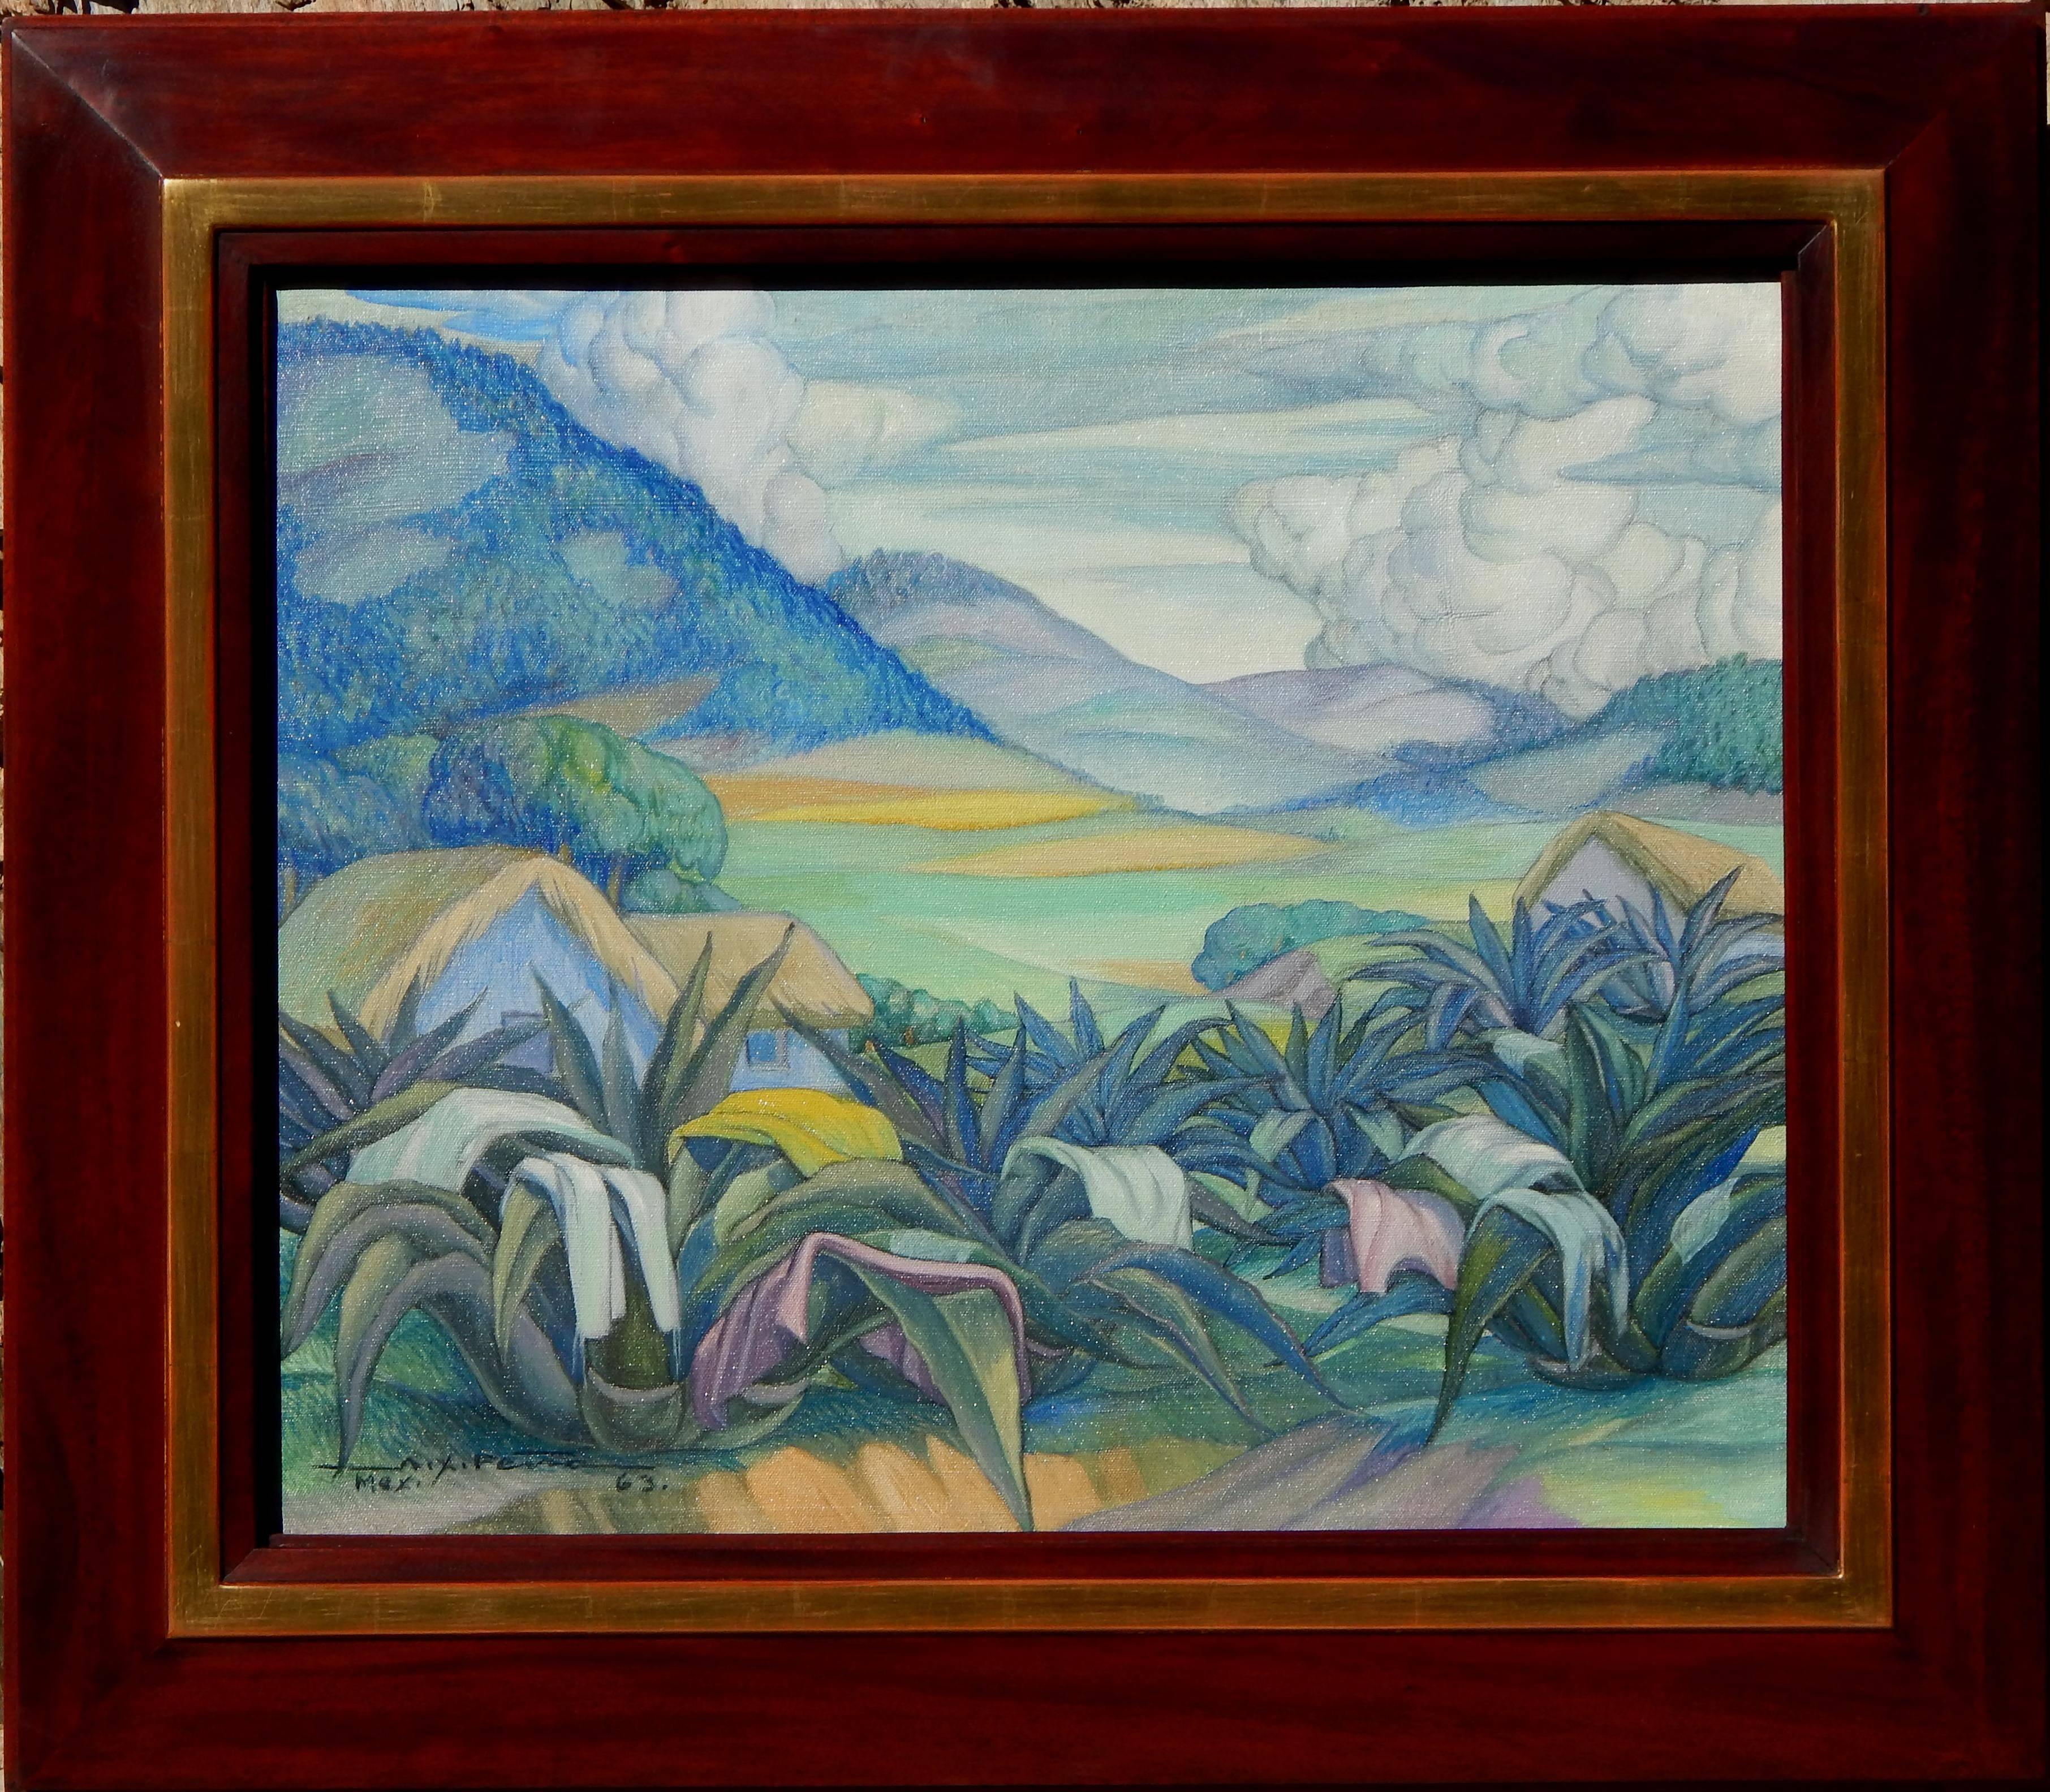 Beautiful Mexican landscape painting by Alfonso Pena
Oil on canvas created 1963. Mexican subject.
Excellent condition, unframed.
Measures: 19 3/4